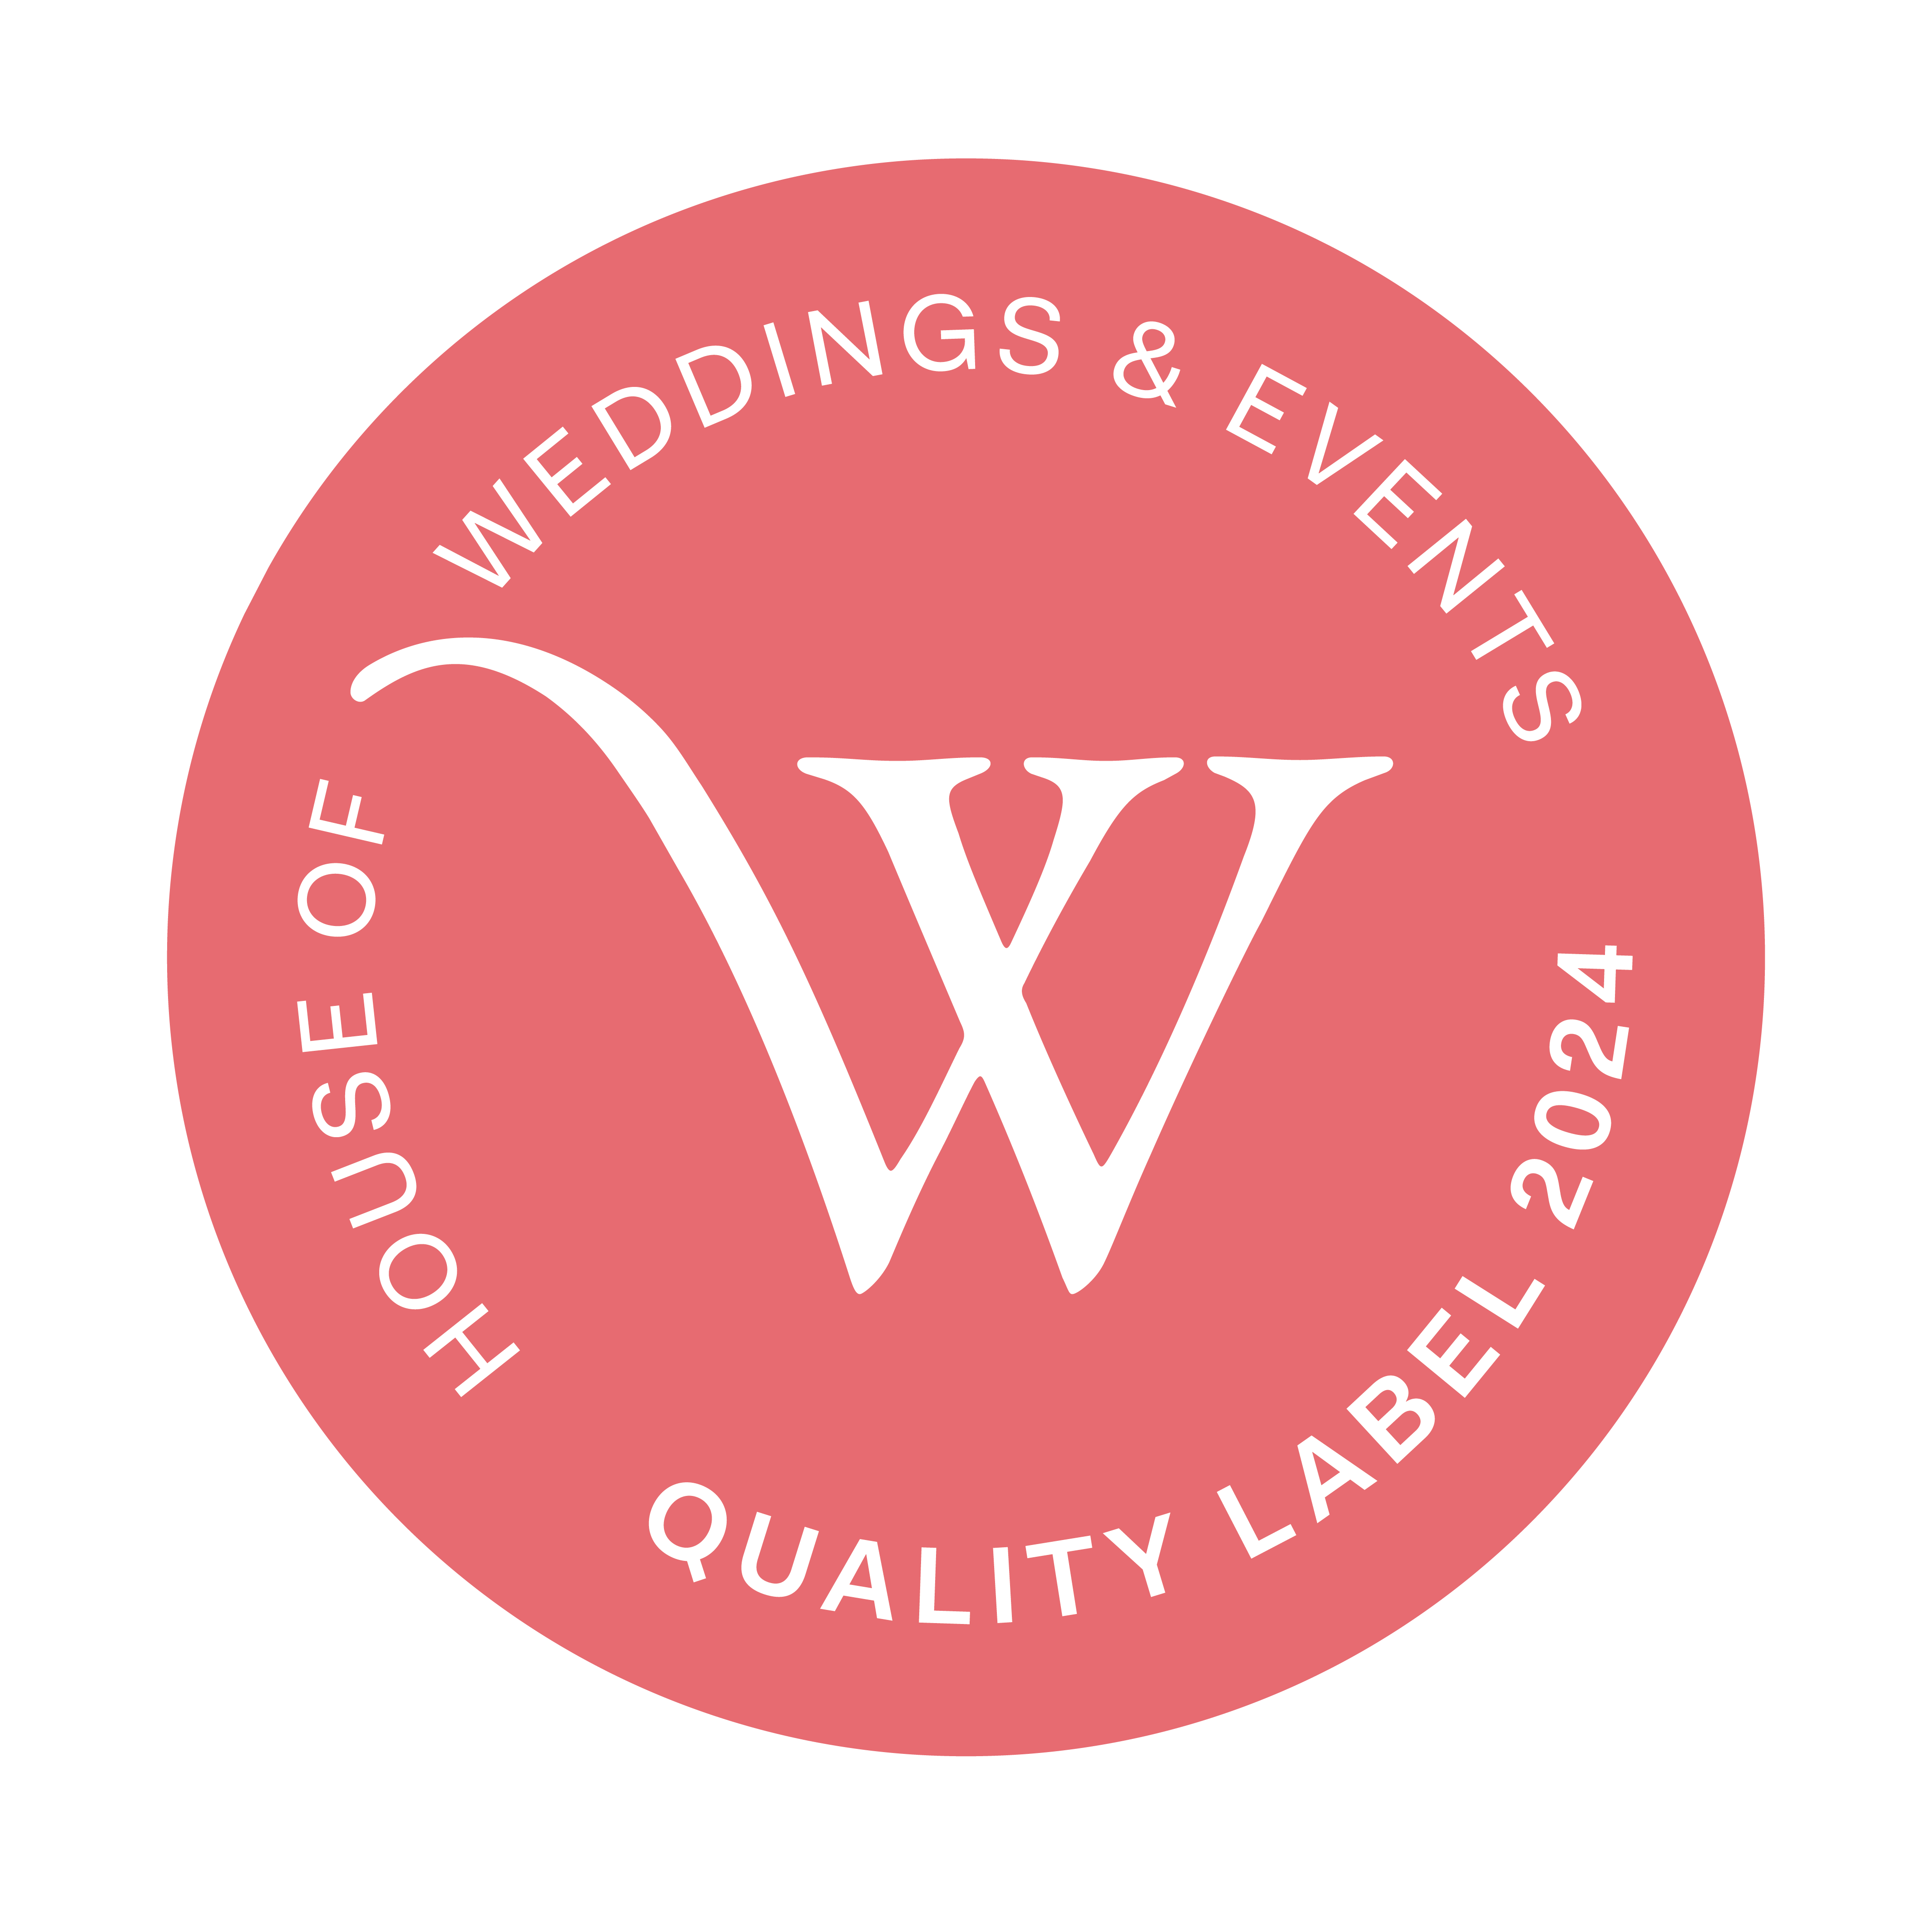 House of weddings quality label